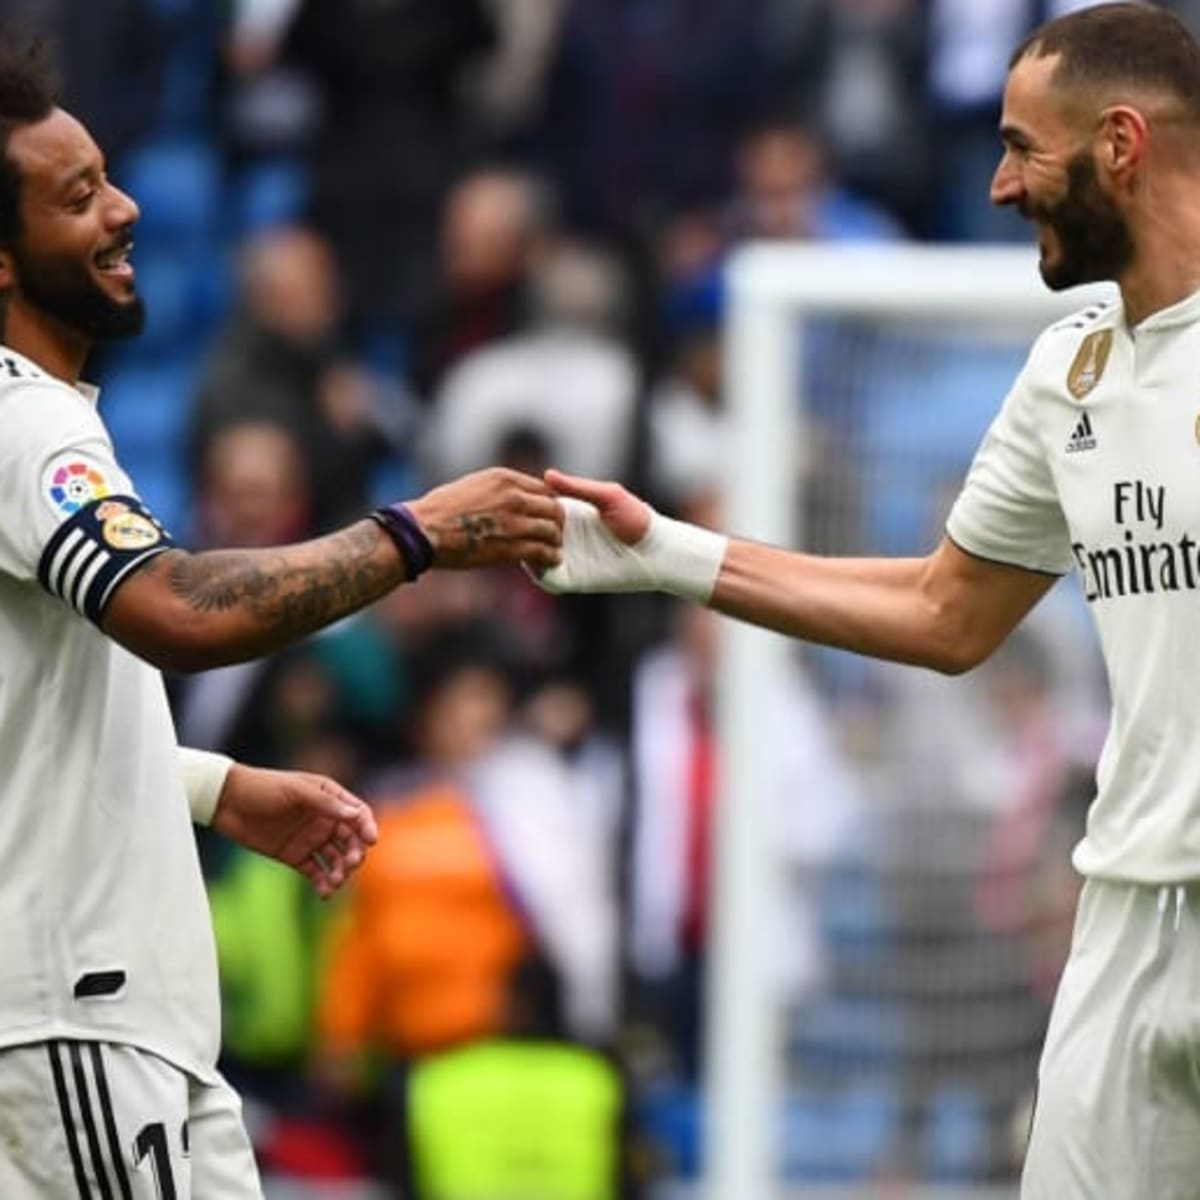 Rayo Vallecano vs Real Madrid Preview Where to Watch, Live Stream, Kick Off Time and Team News